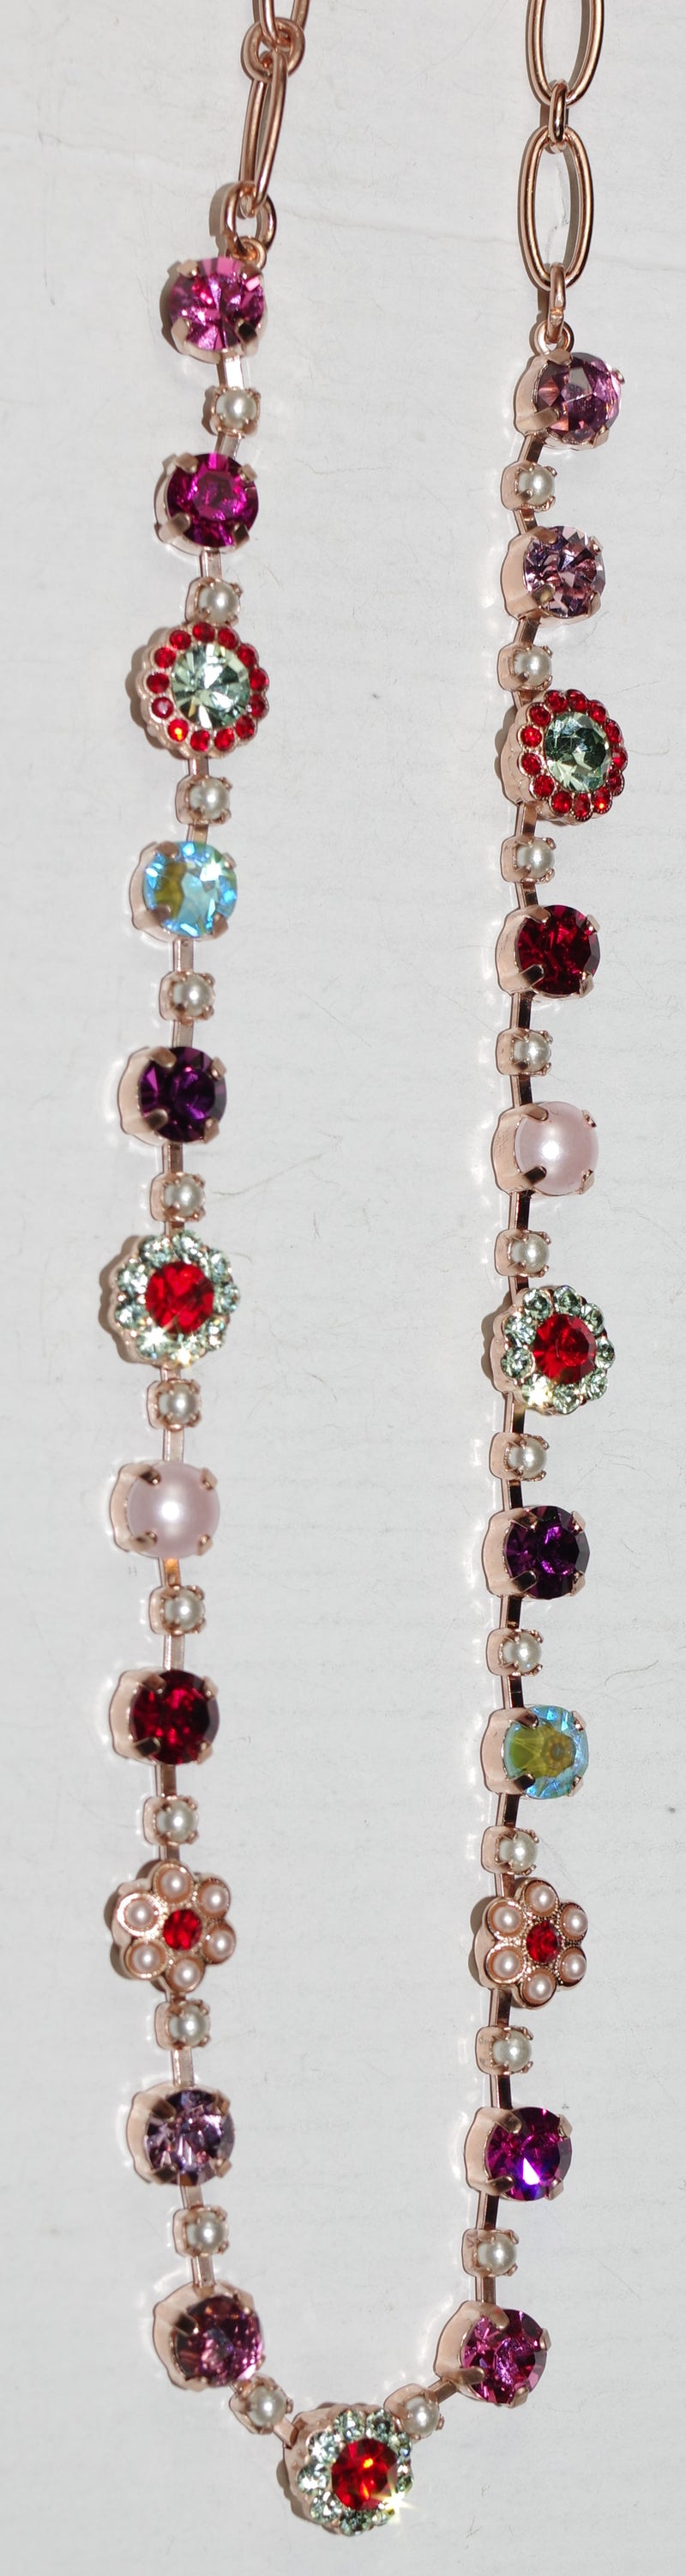 MARIANA NECKLACE ENCHANTED: pink, red, pearl, green, blue stones in rose gold setting, 18" adjustable chain